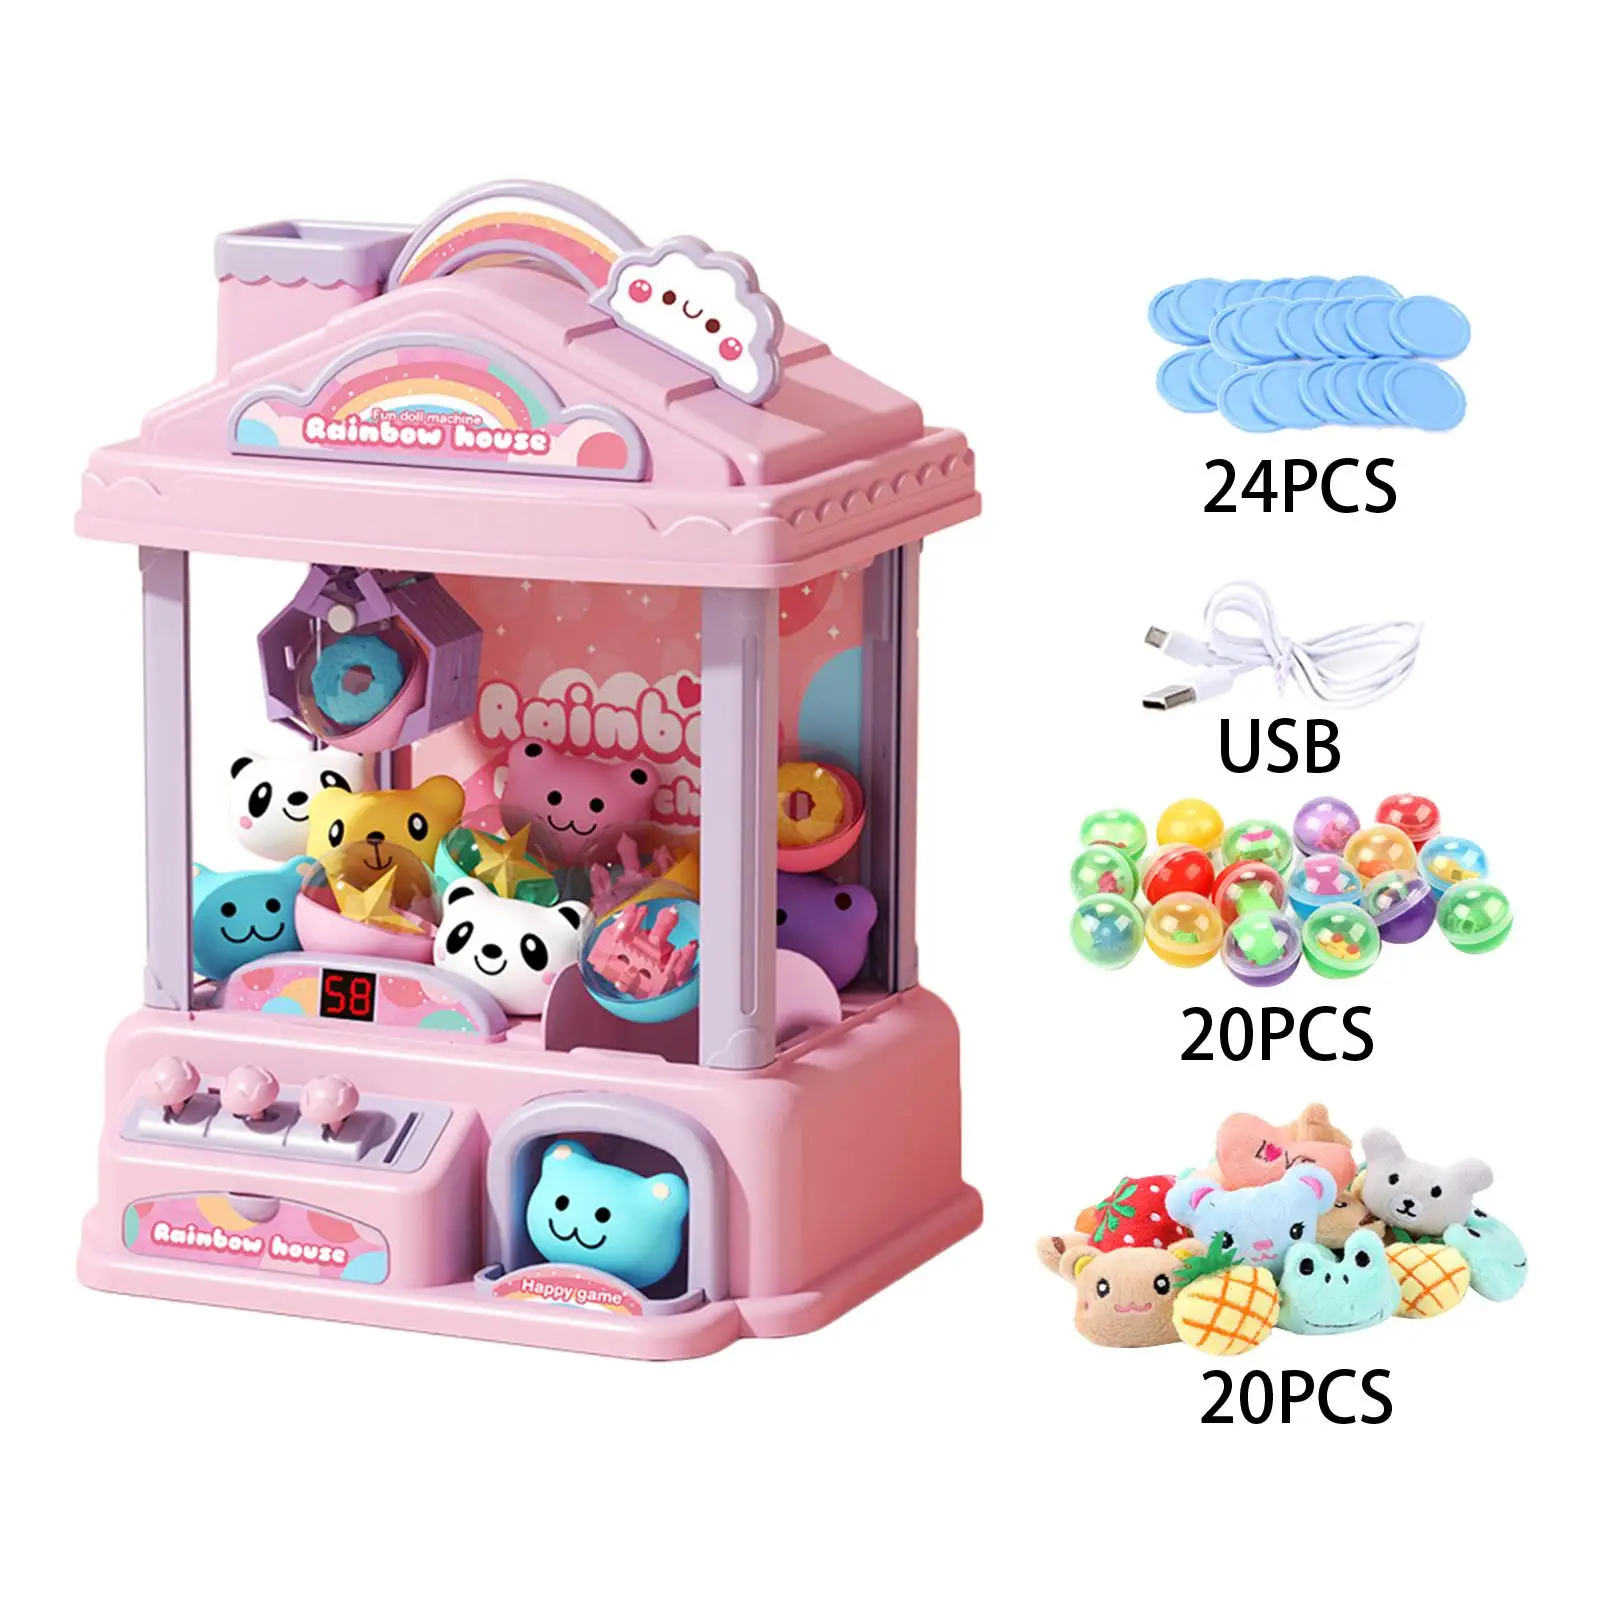 Claw Machine Arcade Game Arcade Candy Capsule Claw Game Prizes Toy for Children 3-6 Years Old Toddler Adults Birthday Gifts